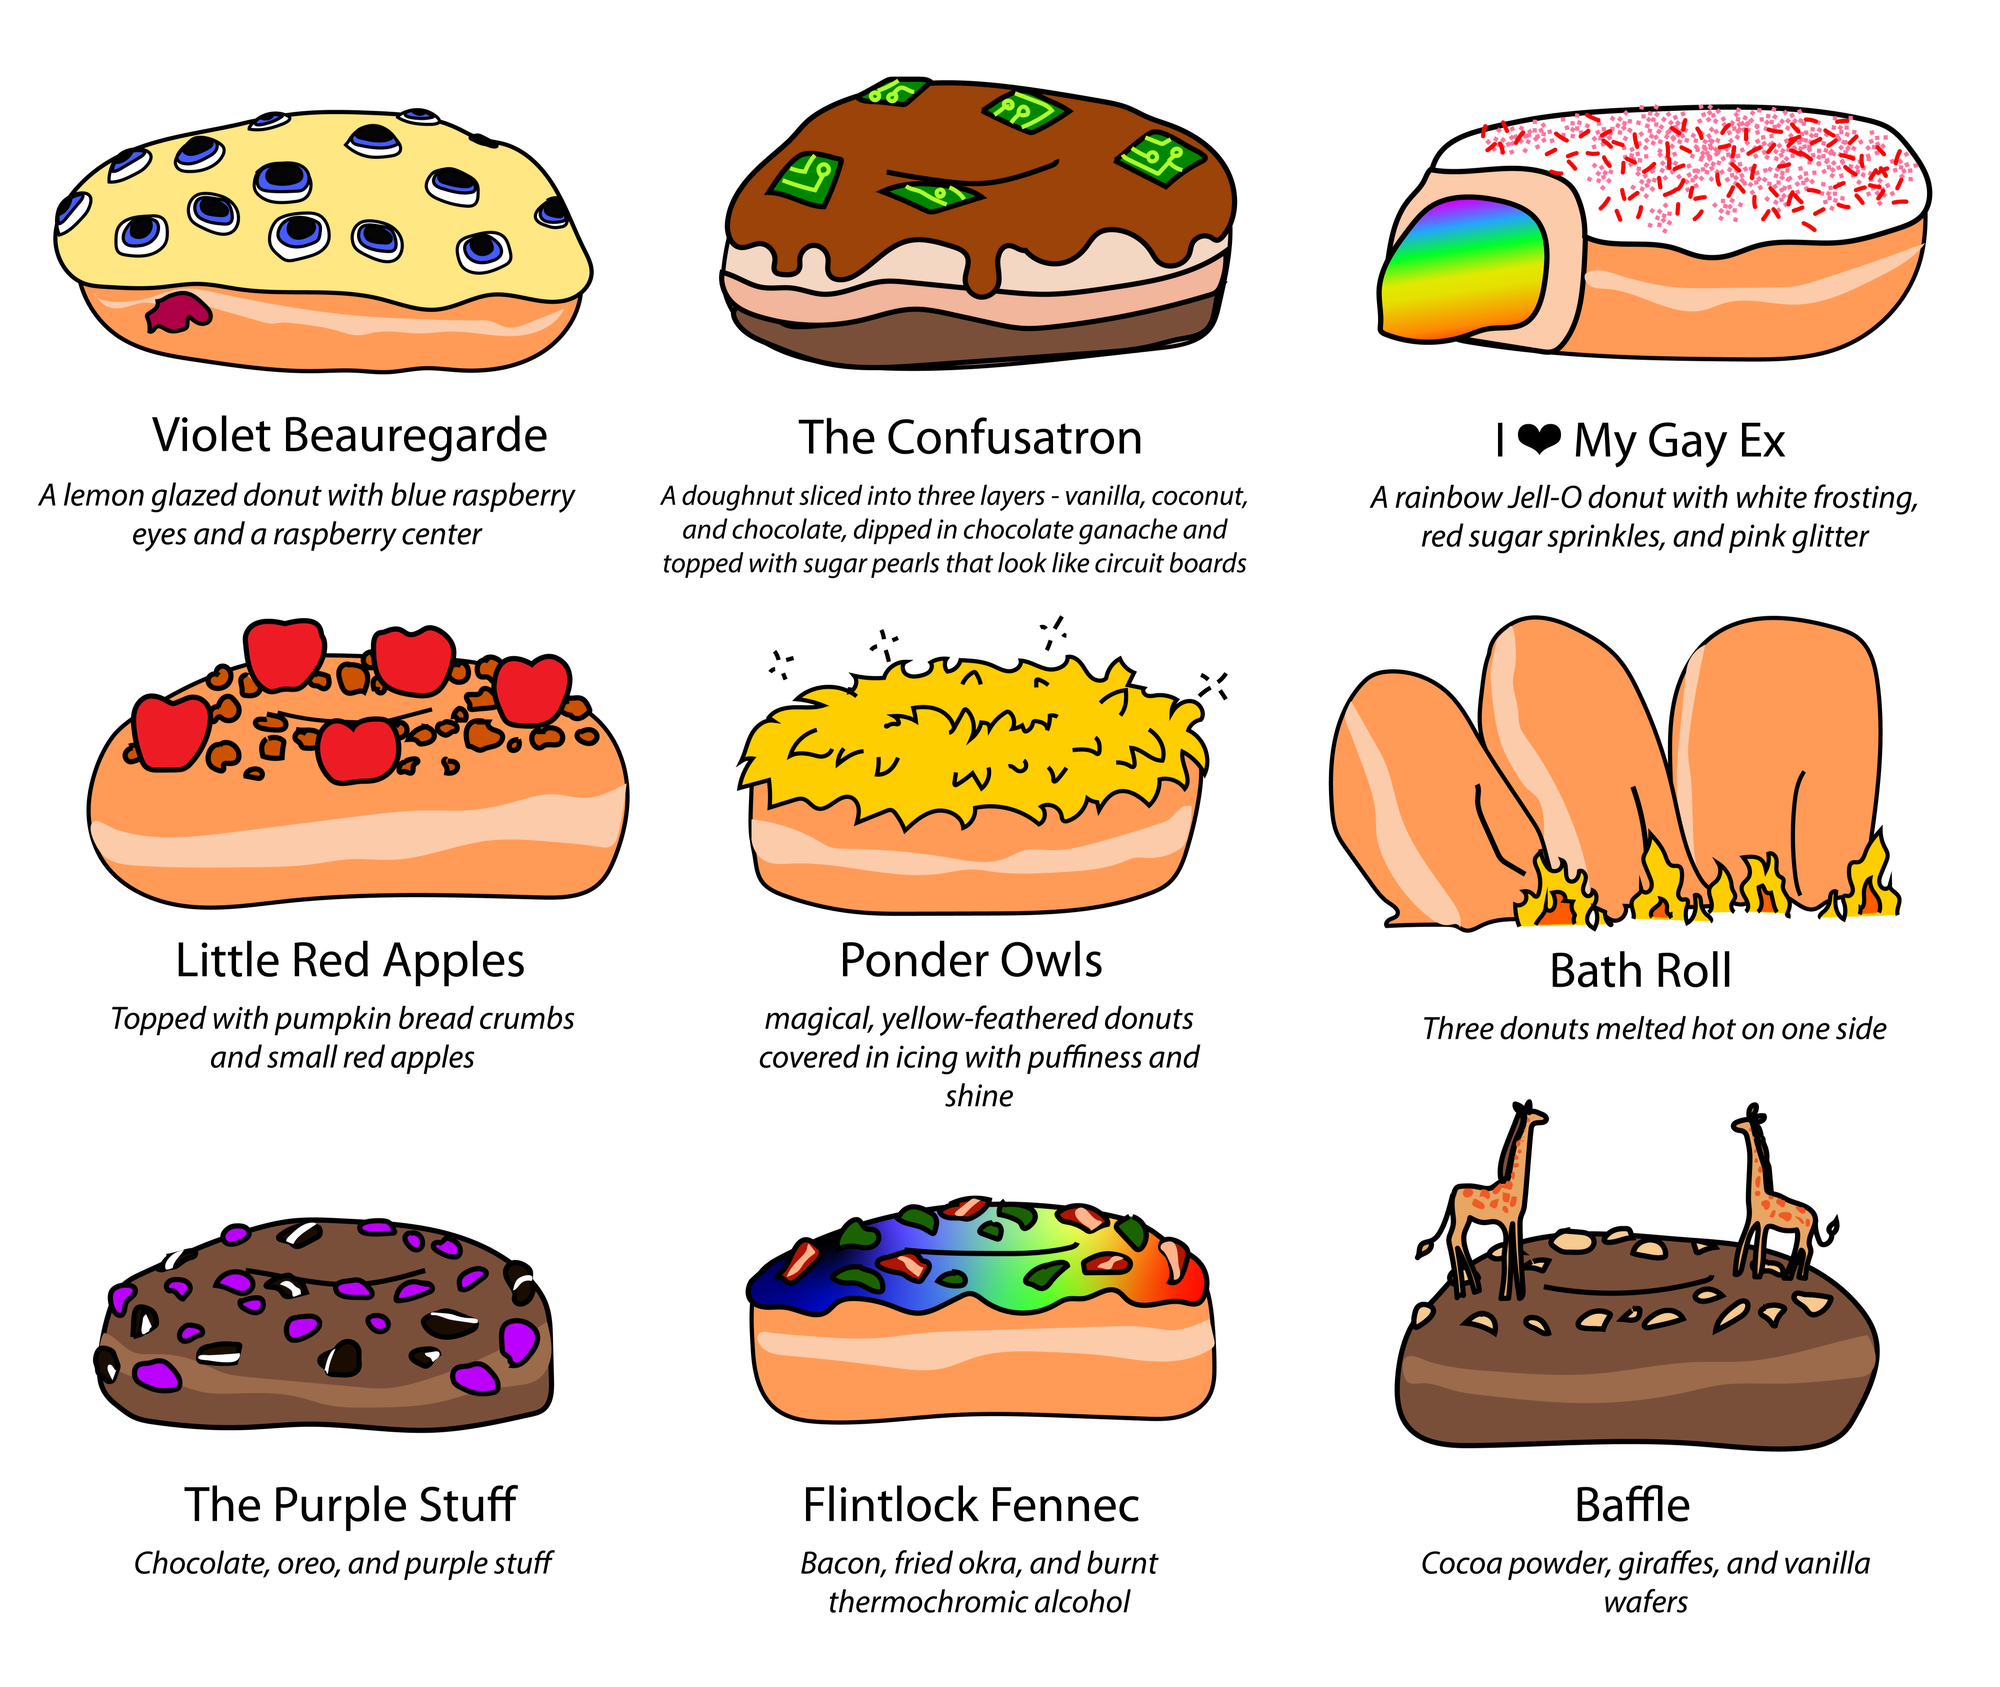 Violet Beauregarde - A lemon glazed donut with blue raspberry eyes and a raspberry center;  The Confusatron - A doughnut sliced into three layers - vanilla, coconut, and chocolate, dipped in chocolate ganache and topped with sugar pearls that look like circuit boards;  I heart My Gay Ex - A rainbow Jell-O donut with white frosting, red sugar sprinkles, and pink glitter; Little Red Apples - Topped with pumpkin bread crumbs and small red apples; Ponder Owls - magical, yellow-feathered donuts covered in icing with puffiness and shine; Bath Roll - Three donuts melted hot on one side; The Purple Stuff - Chocolate, oreo, and purple stuff; Flintlock fennec - bacon, fried okra, and burnt thermochromic alcohol; Baffle - cocoa powder, giraffes, and vanilla wafers